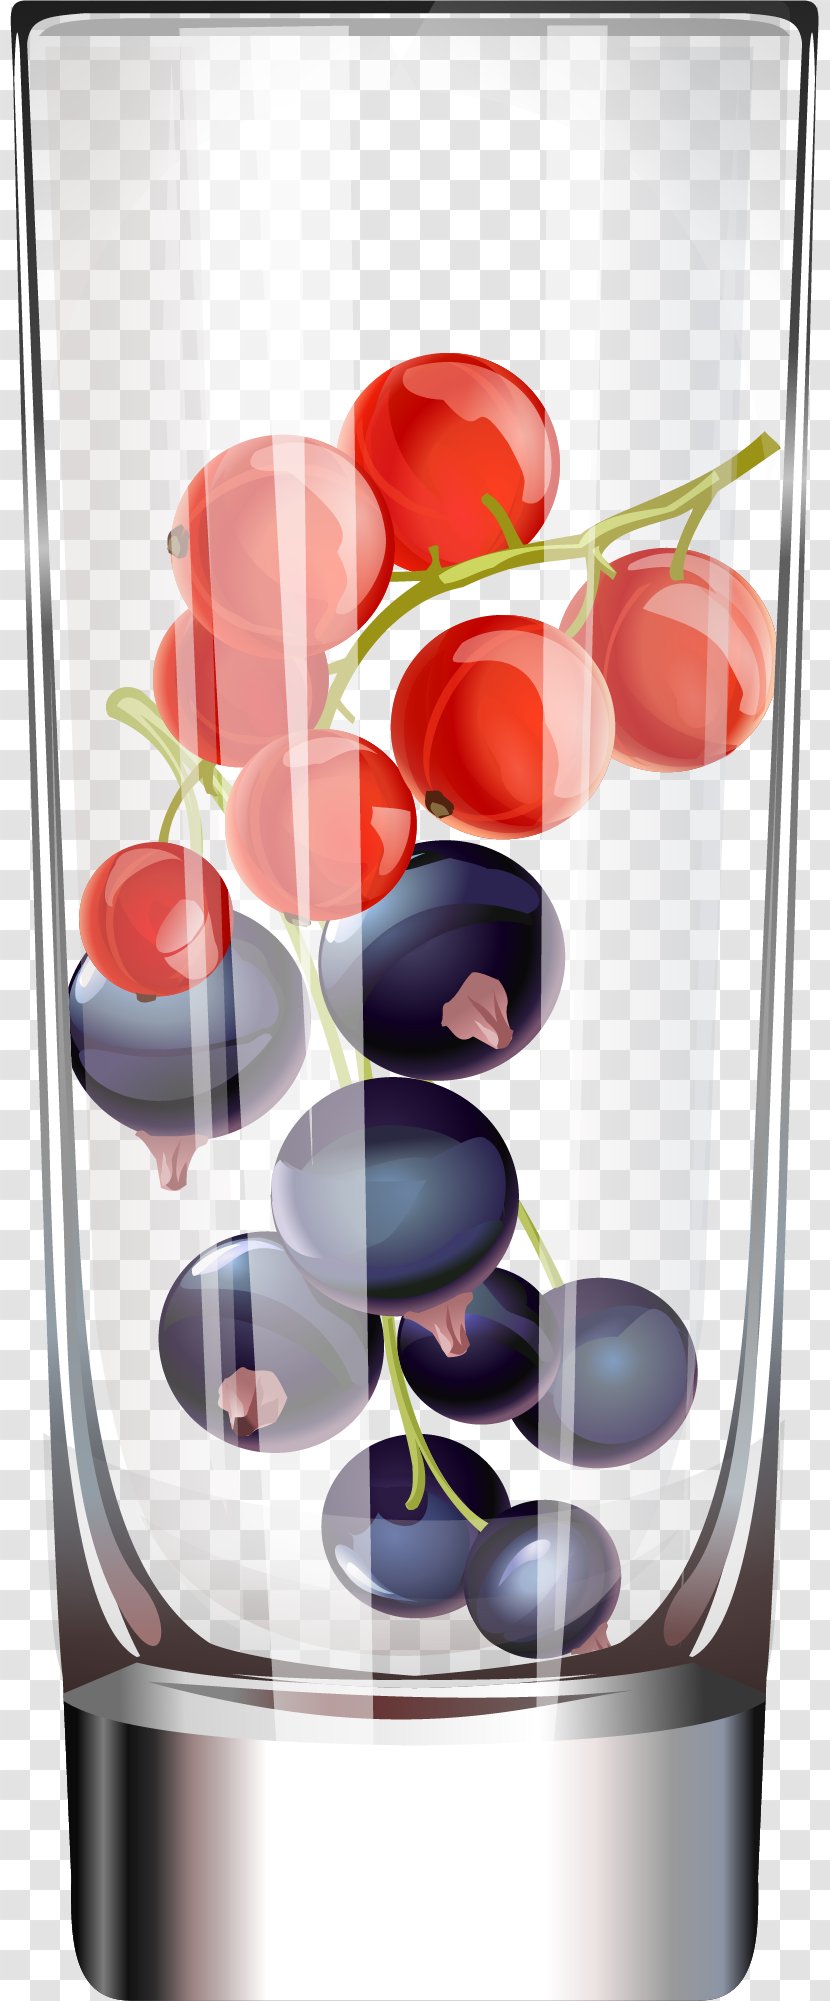 Juice Frutti Di Bosco Illustration - Blackberry - A Glass With Cranberry Transparent PNG